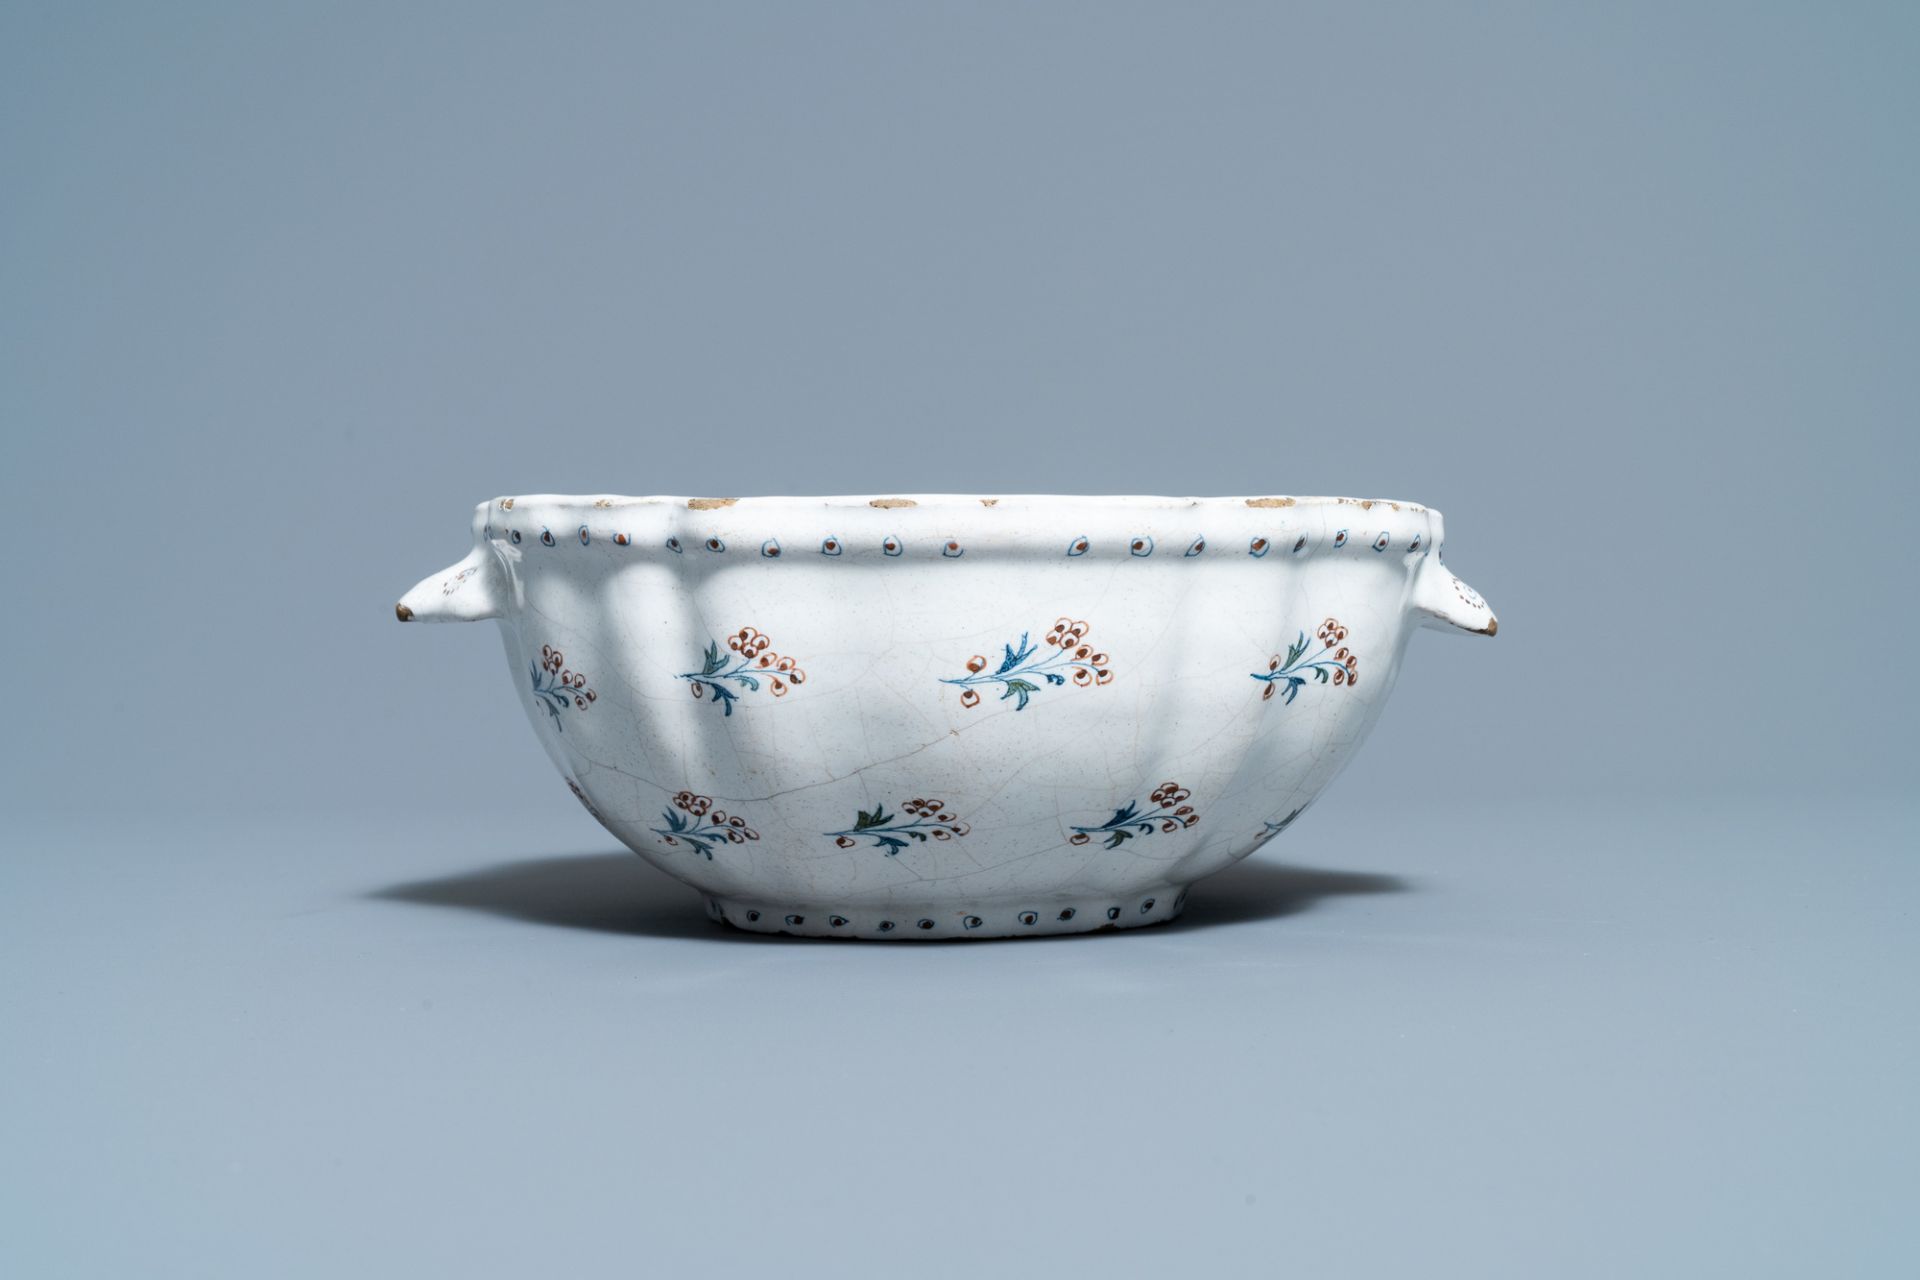 A Brussels faience basin with 'a la haie fleurie' design, 18th C. - Image 4 of 7